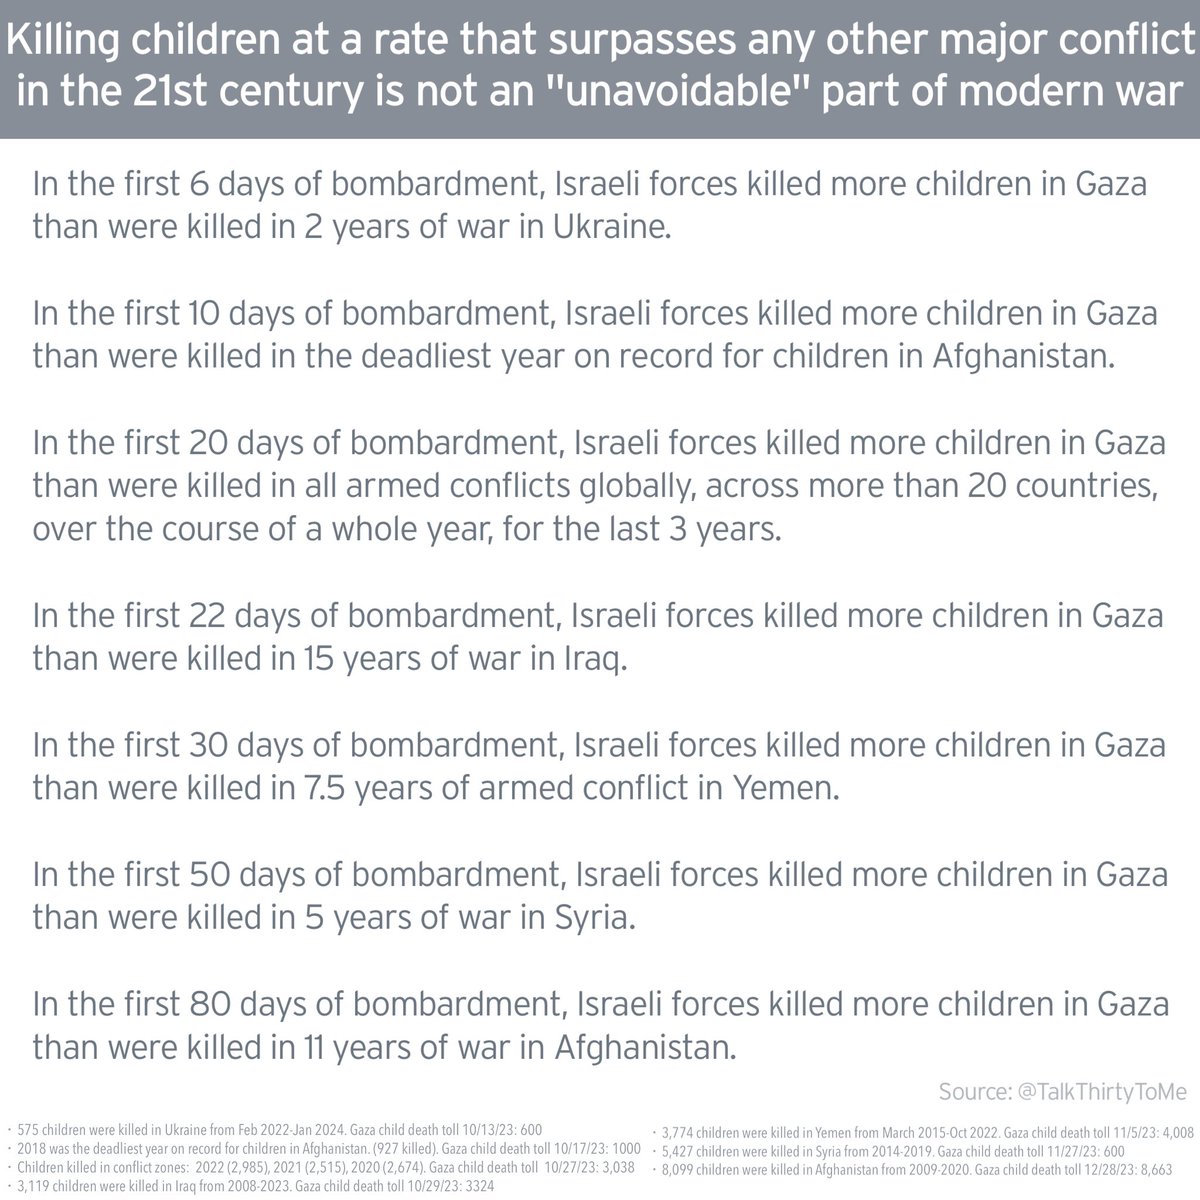 A guy wrote 'war is war' on my tweet about children in Gaza so I spent 368 hours sourcing historical death tolls from the deadliest conflict zones so we're all clear that Israel is massacring kids at a rate that surpasses the genocidal campaigns of the world's most evil dictators